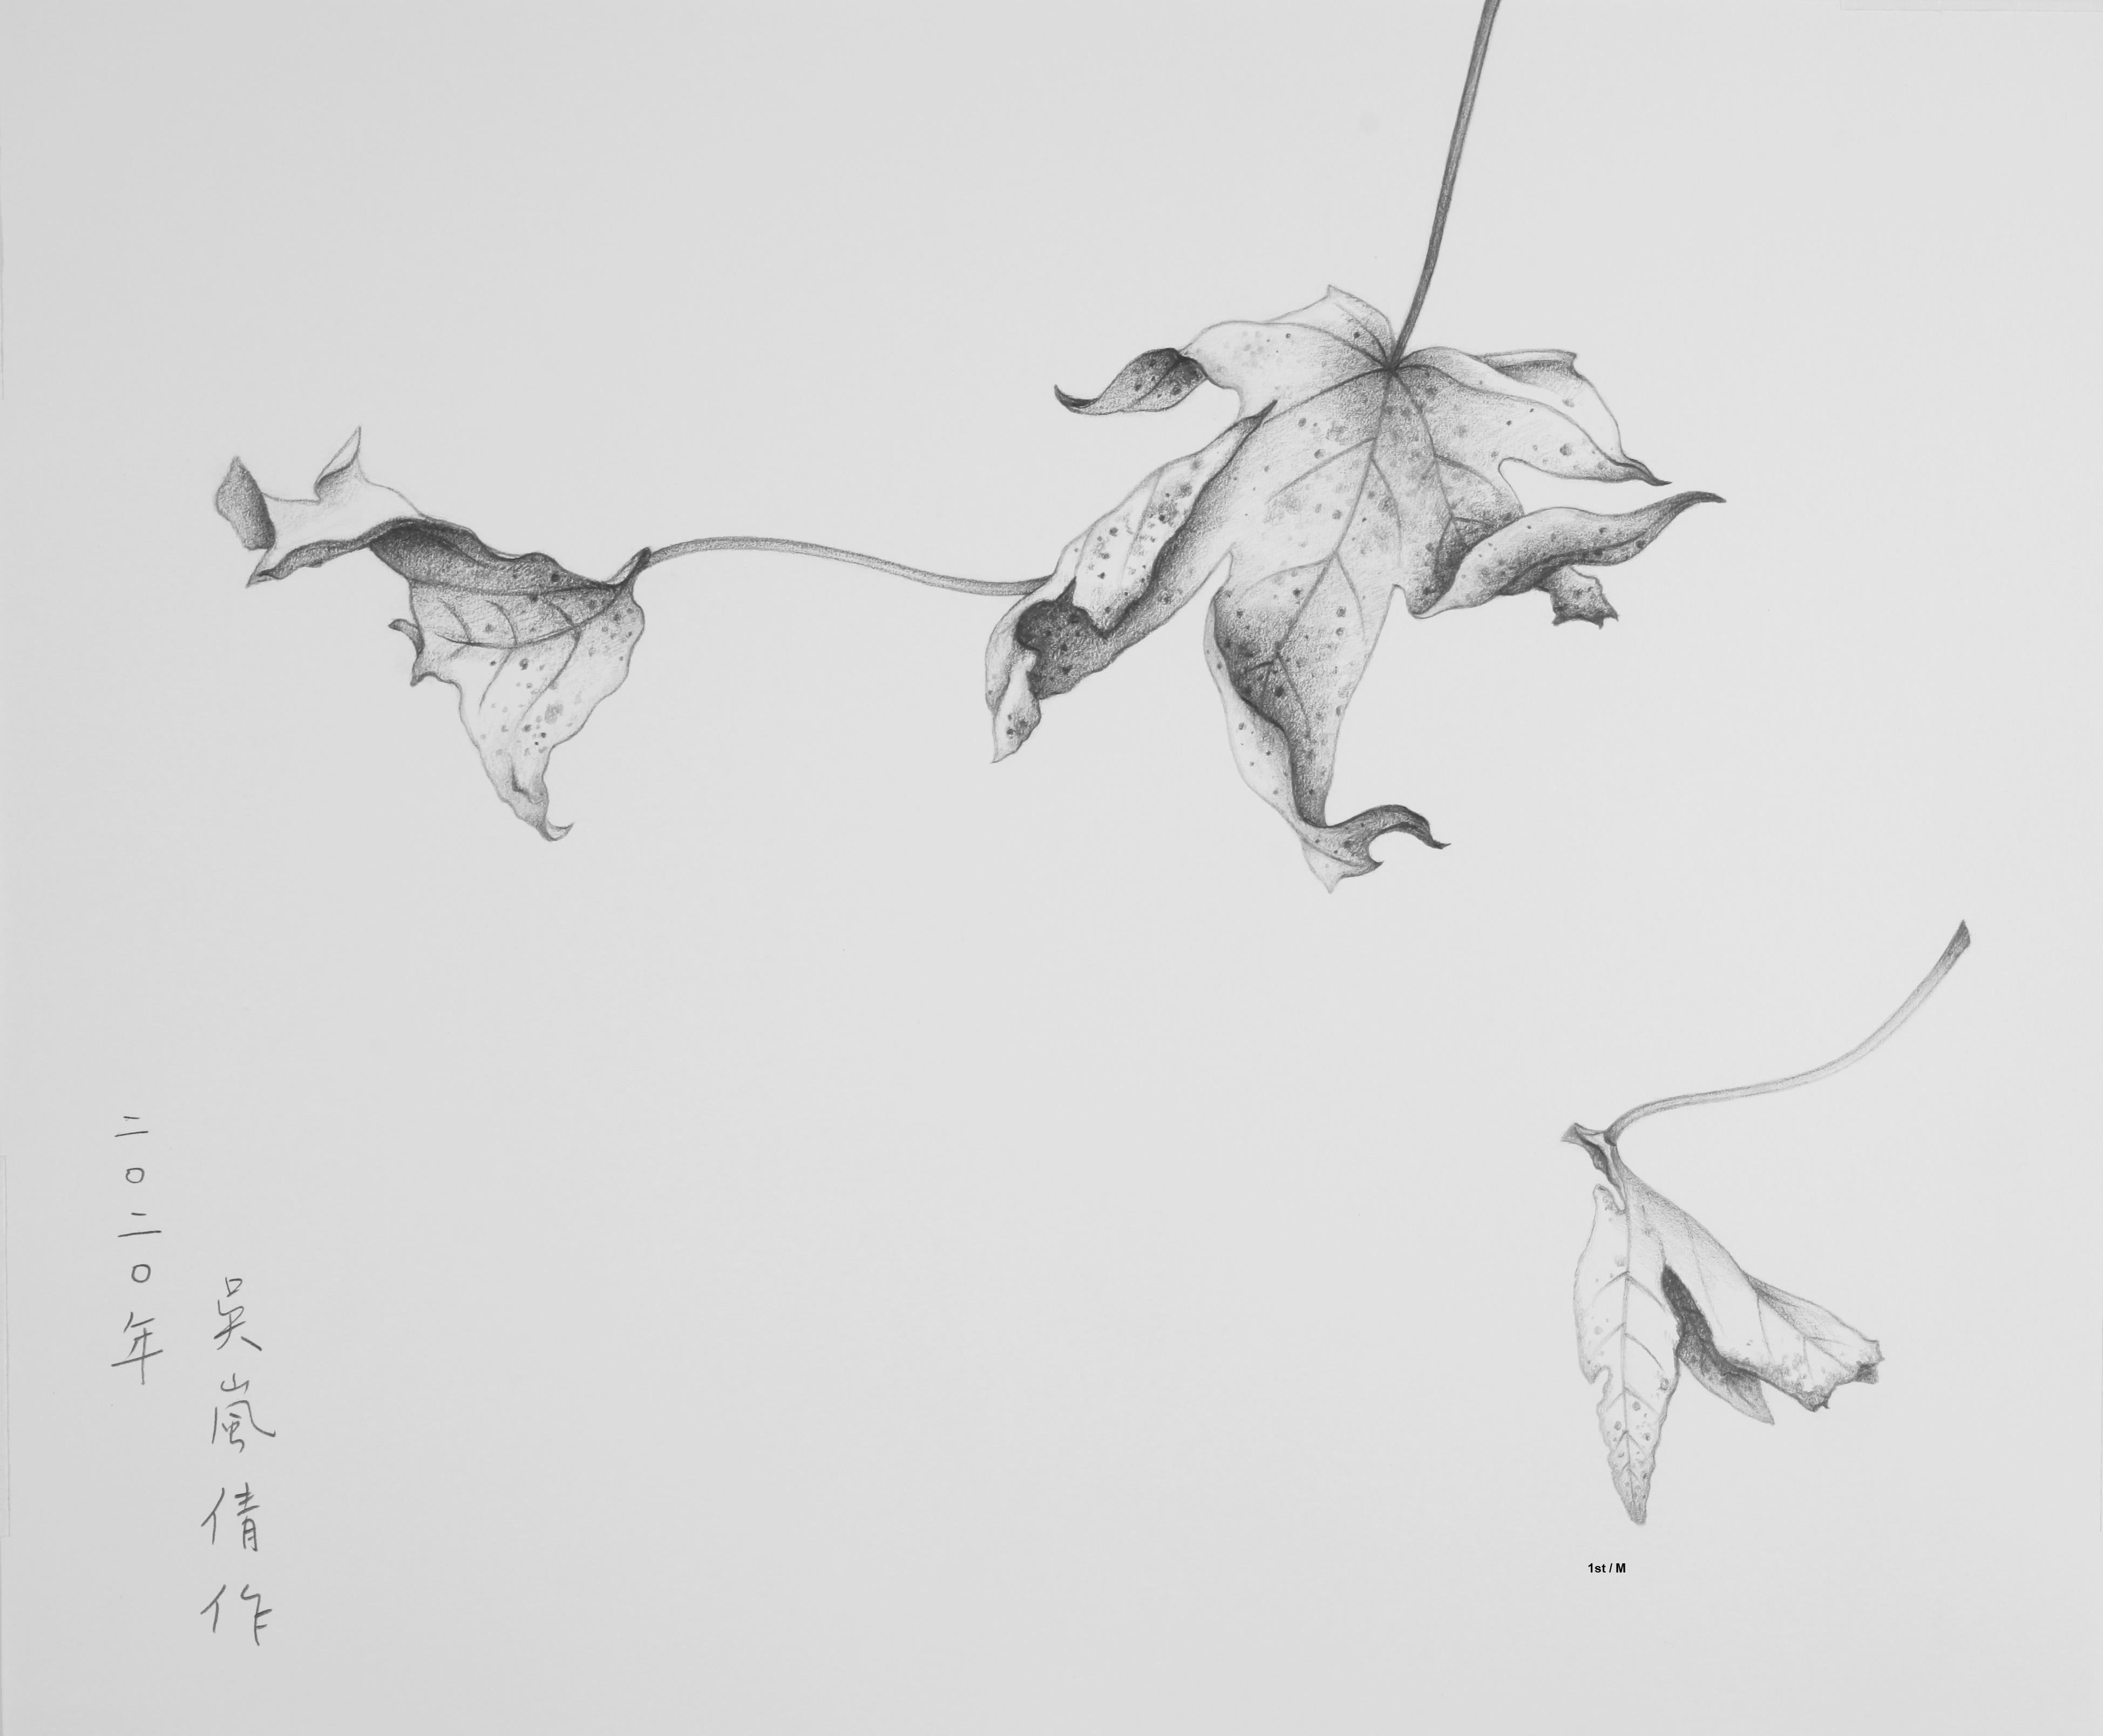 Wu Lan-Chiann Abstract Drawing - Pencil on paper - Study of Dancing with the Wind, 2020 - custom framed